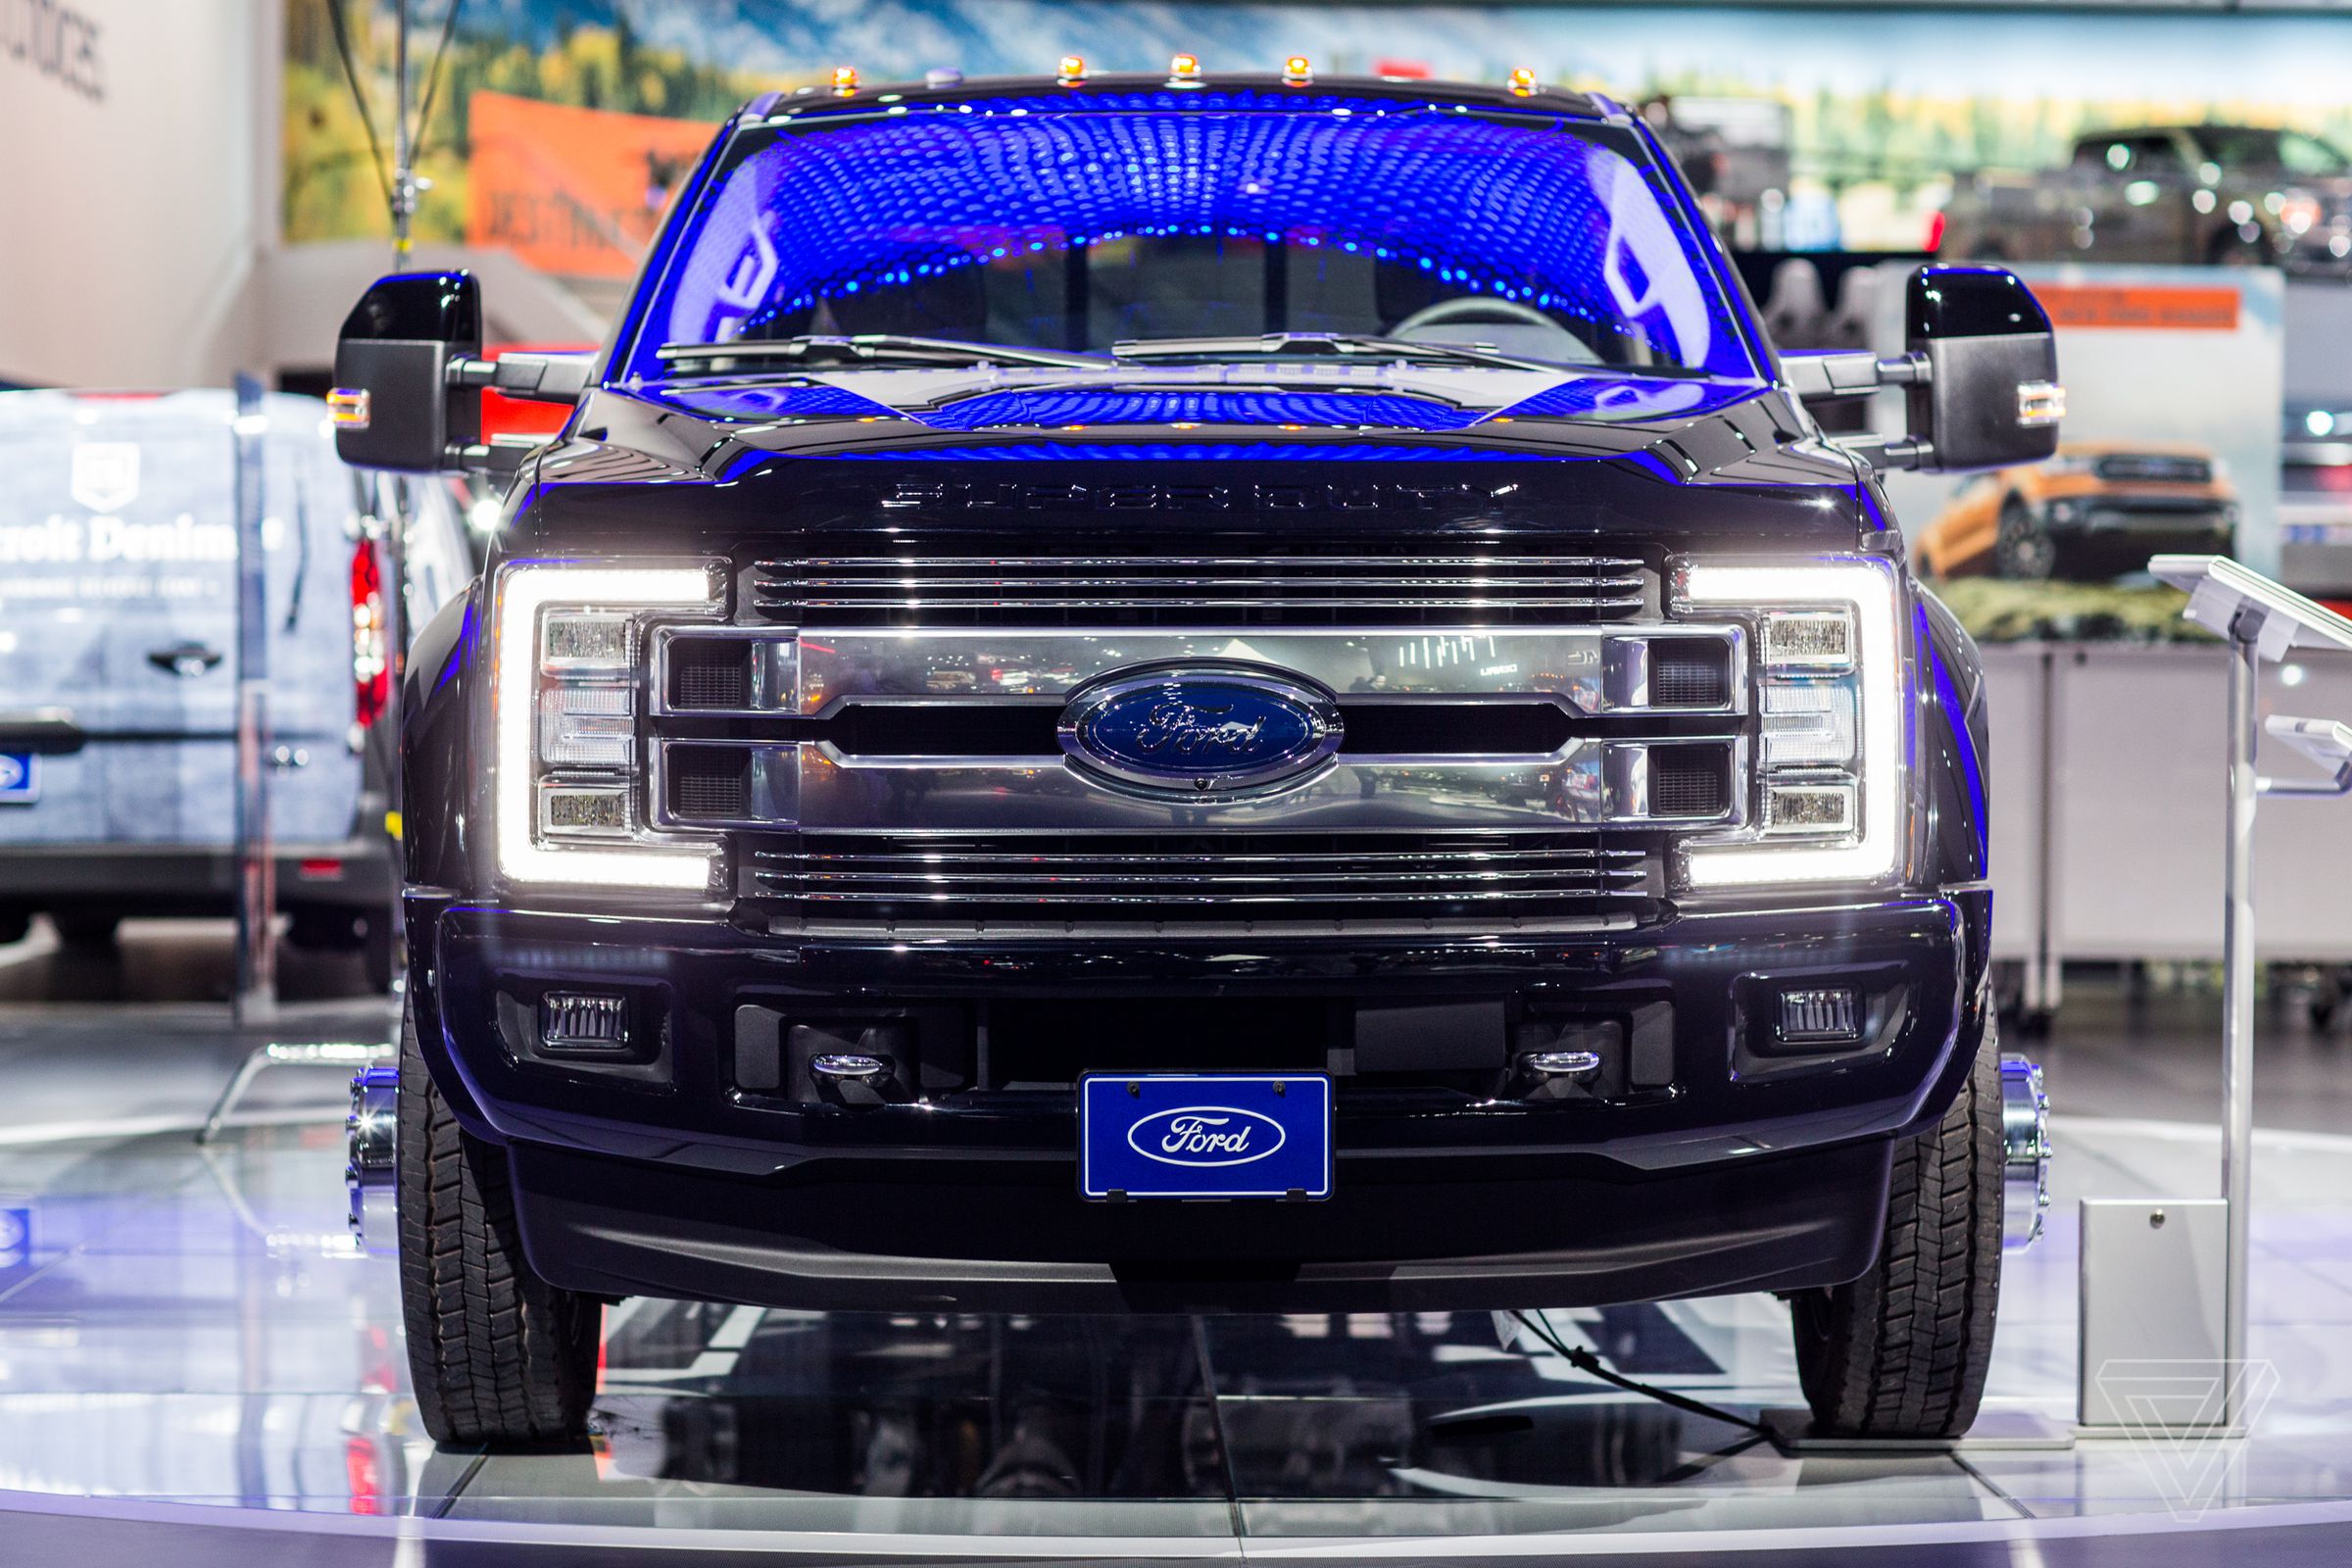 This year’s show was dominated by news about trucks, and Ford’s F150s were one of the main attractions at its booth.